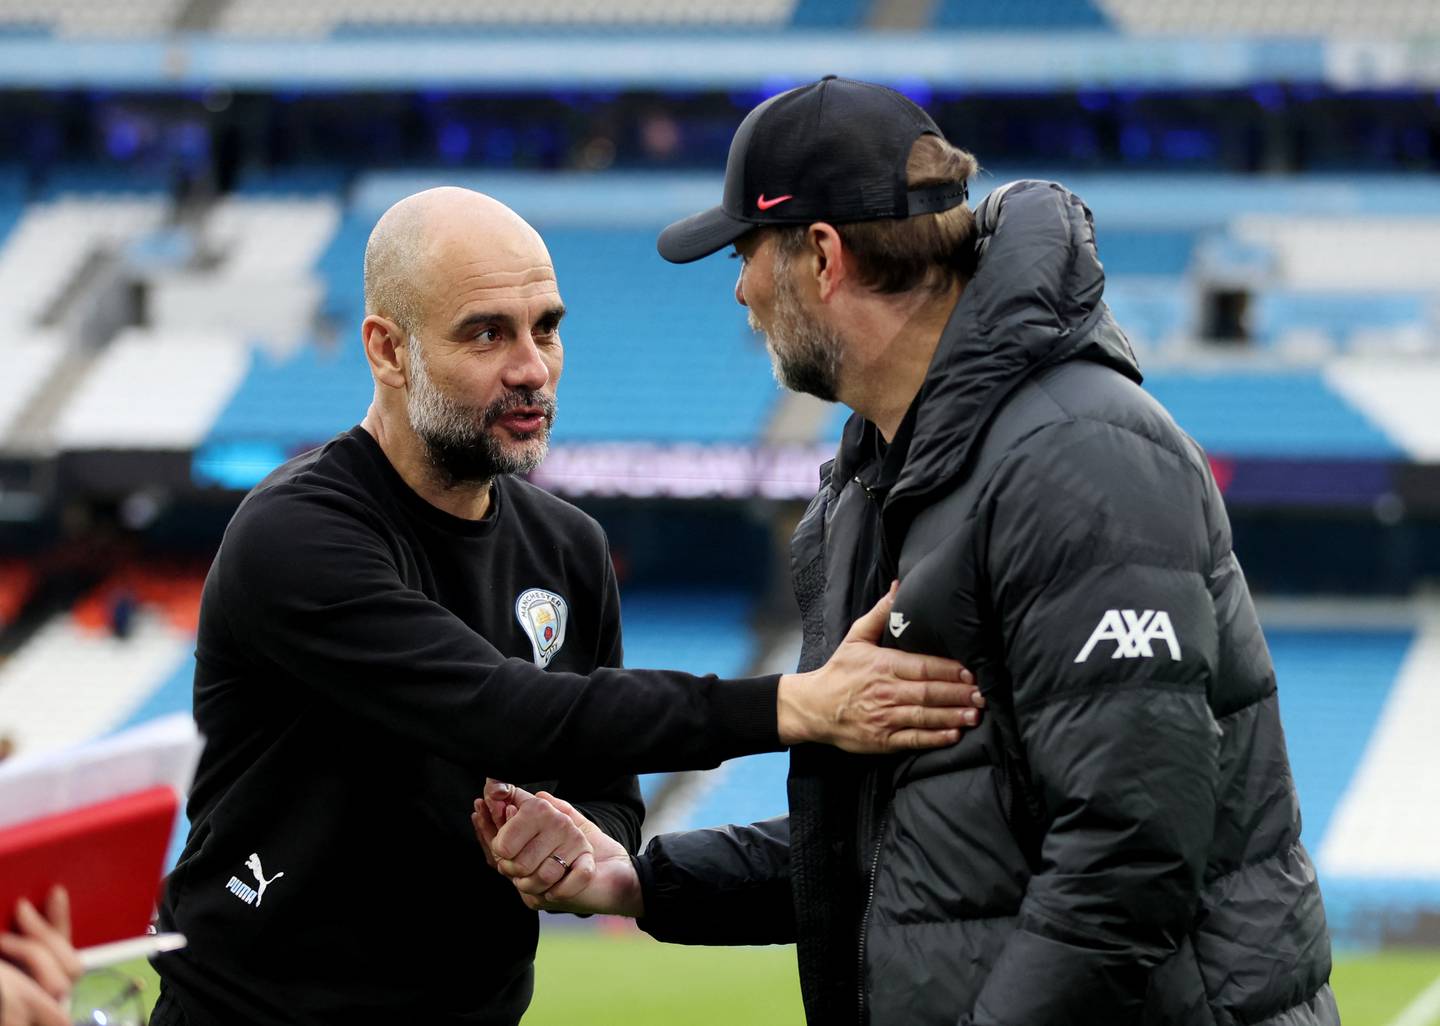 Manchester City coach Pep Guardiola with Liverpool manager Jurgen Klopp after the match. Action Images